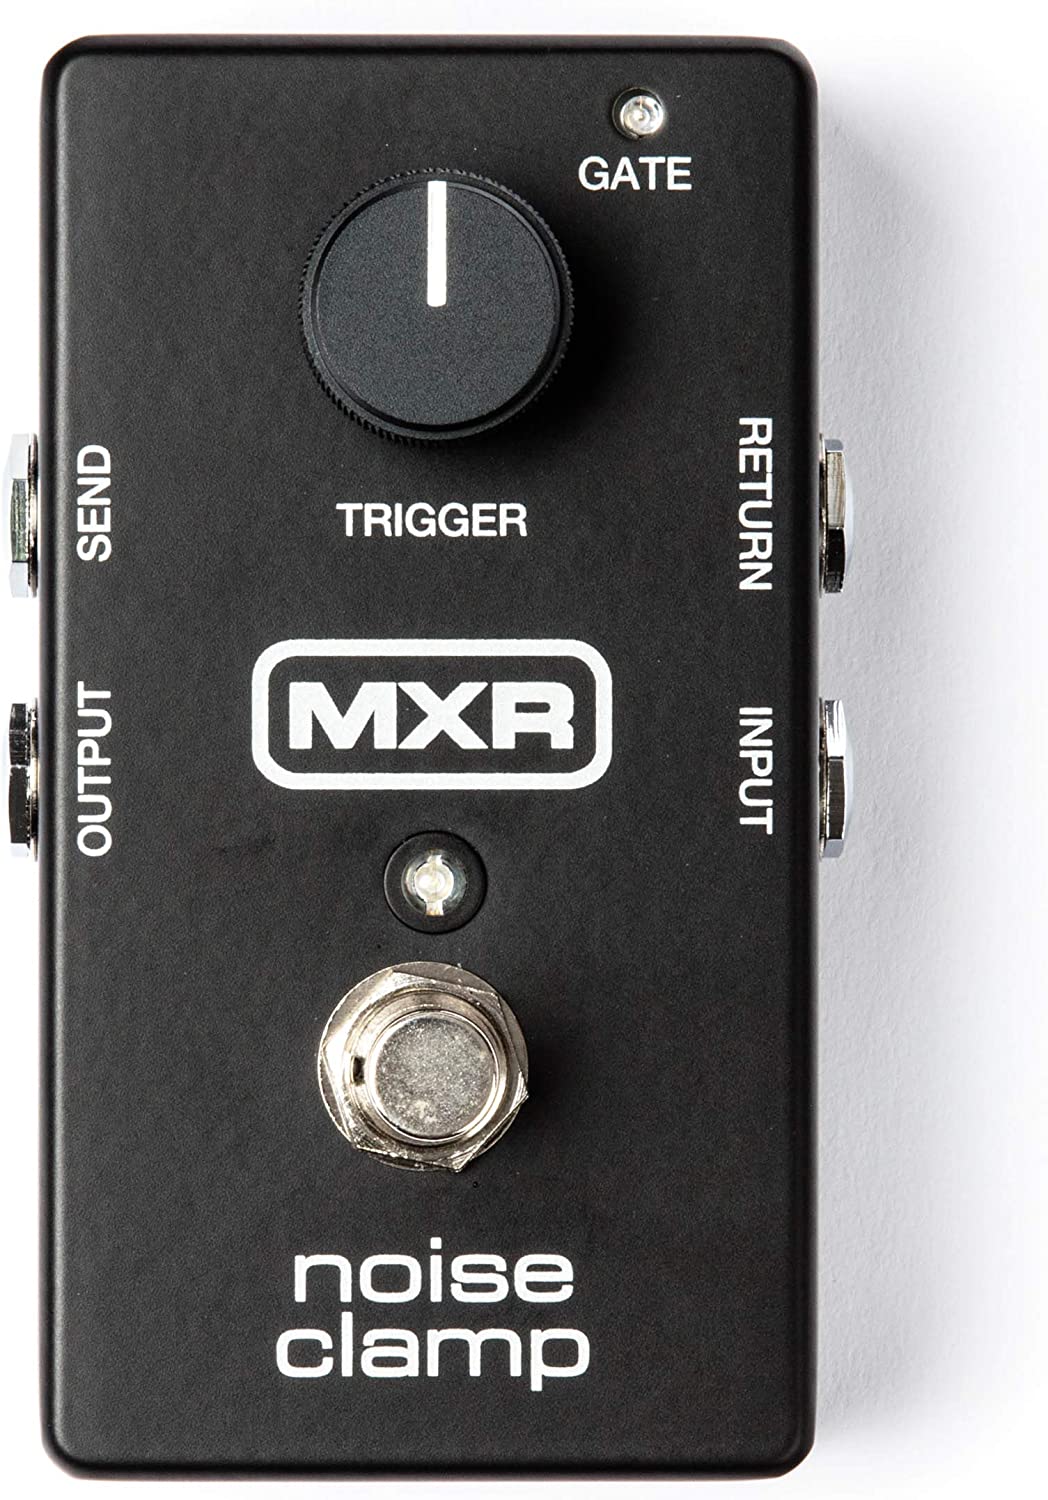 MXR Noise Clamp Noise Reduction Pedal on a white background